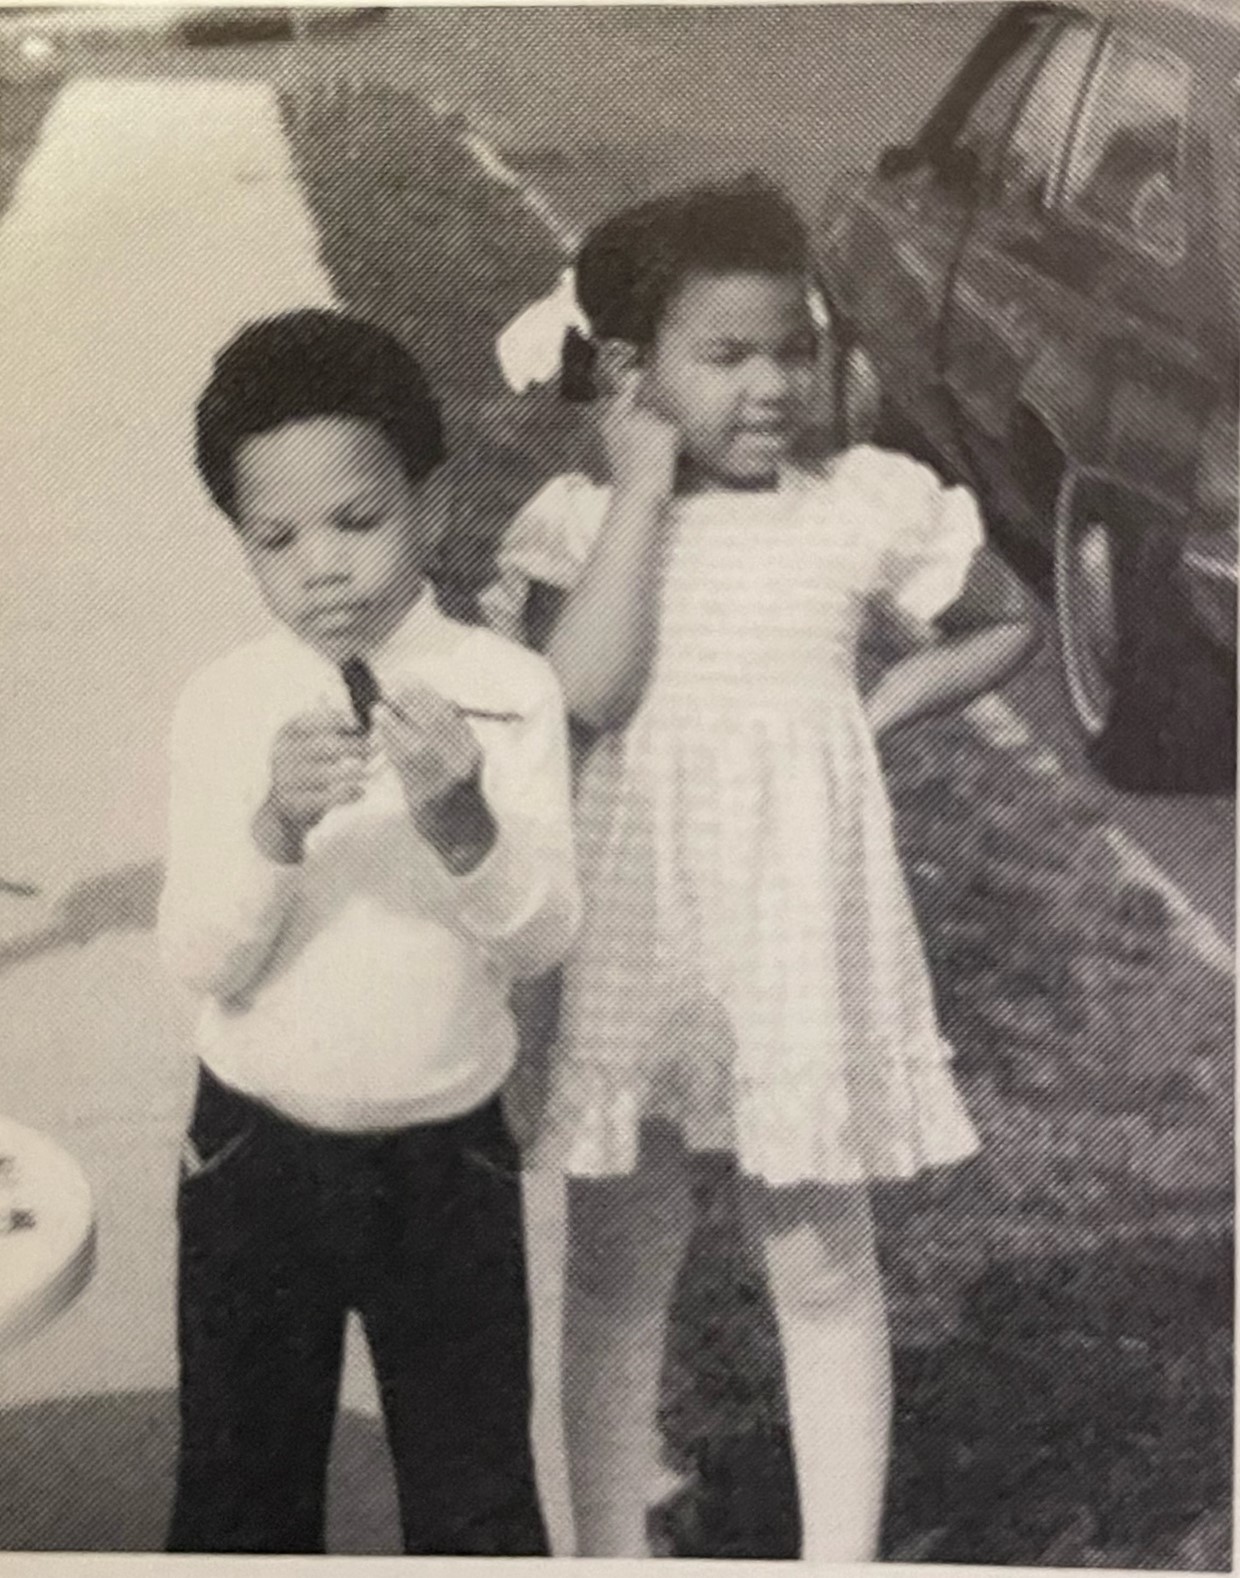 The author and sister as young children